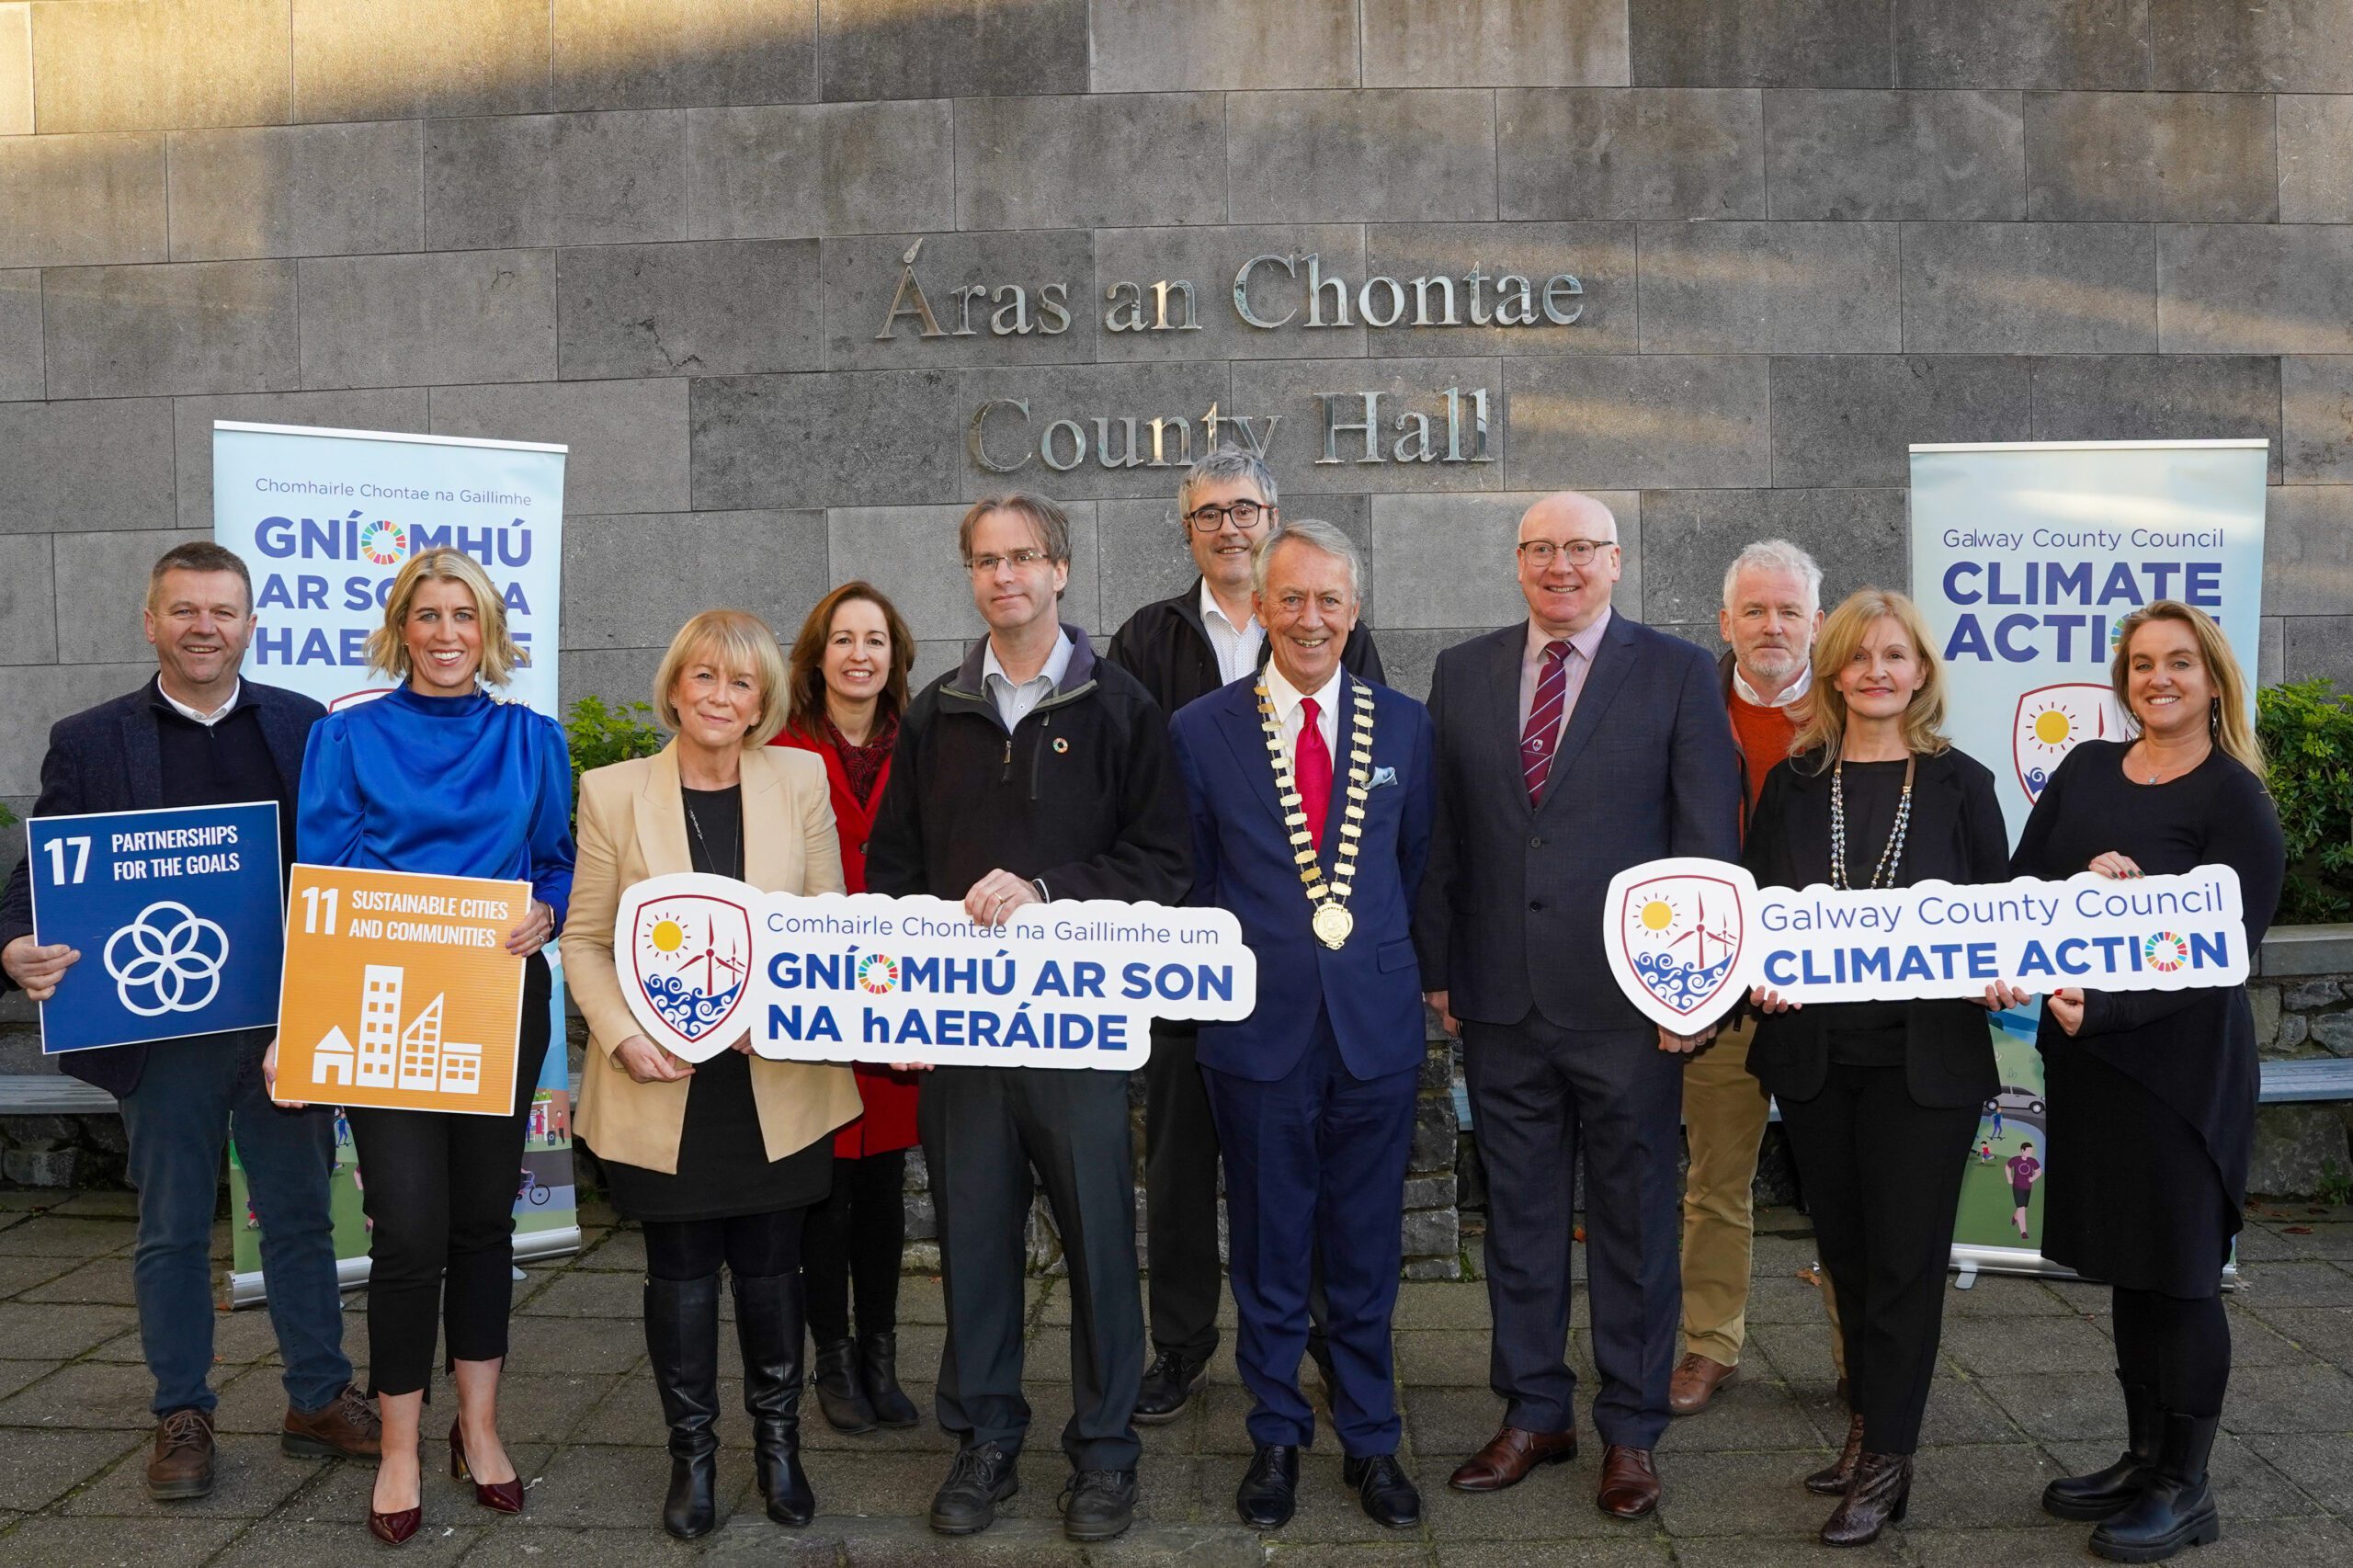 GALWAY’S NEW €762,000 FUND TO SUPPORT COMMUNITY CLIMATE ACTION